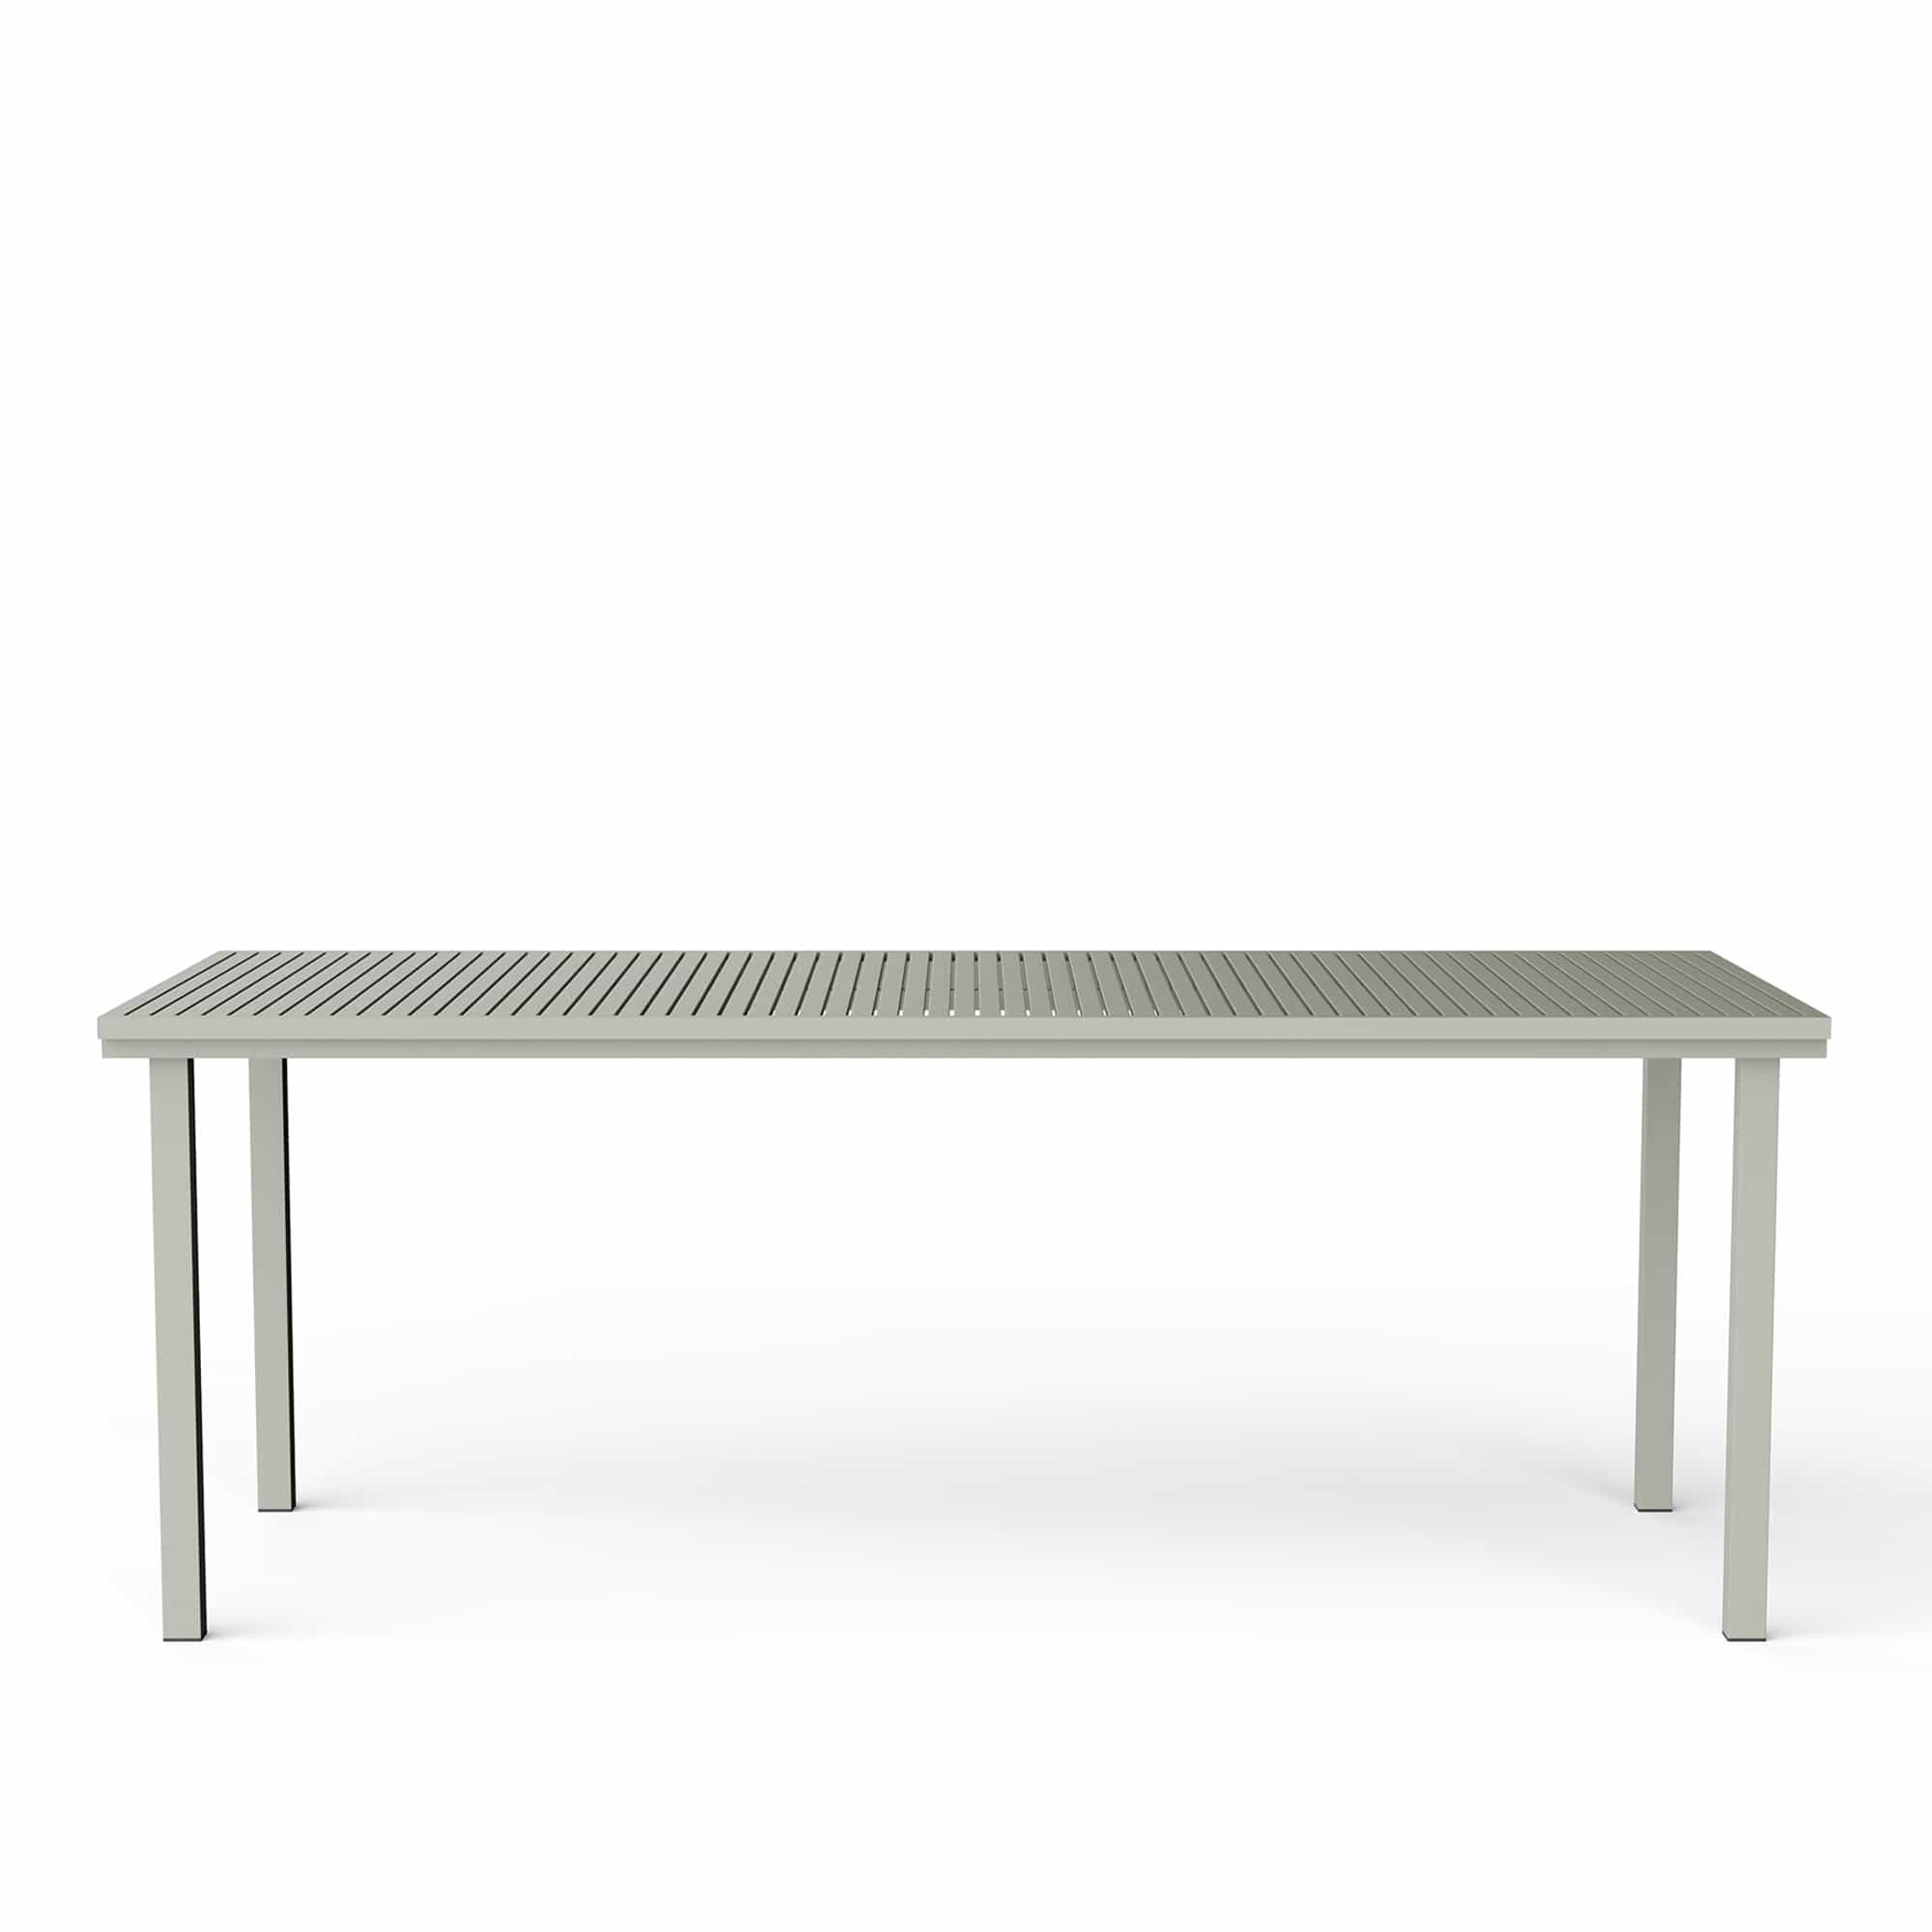 19 Outdoors Dining Table 200,5 x 90 cm